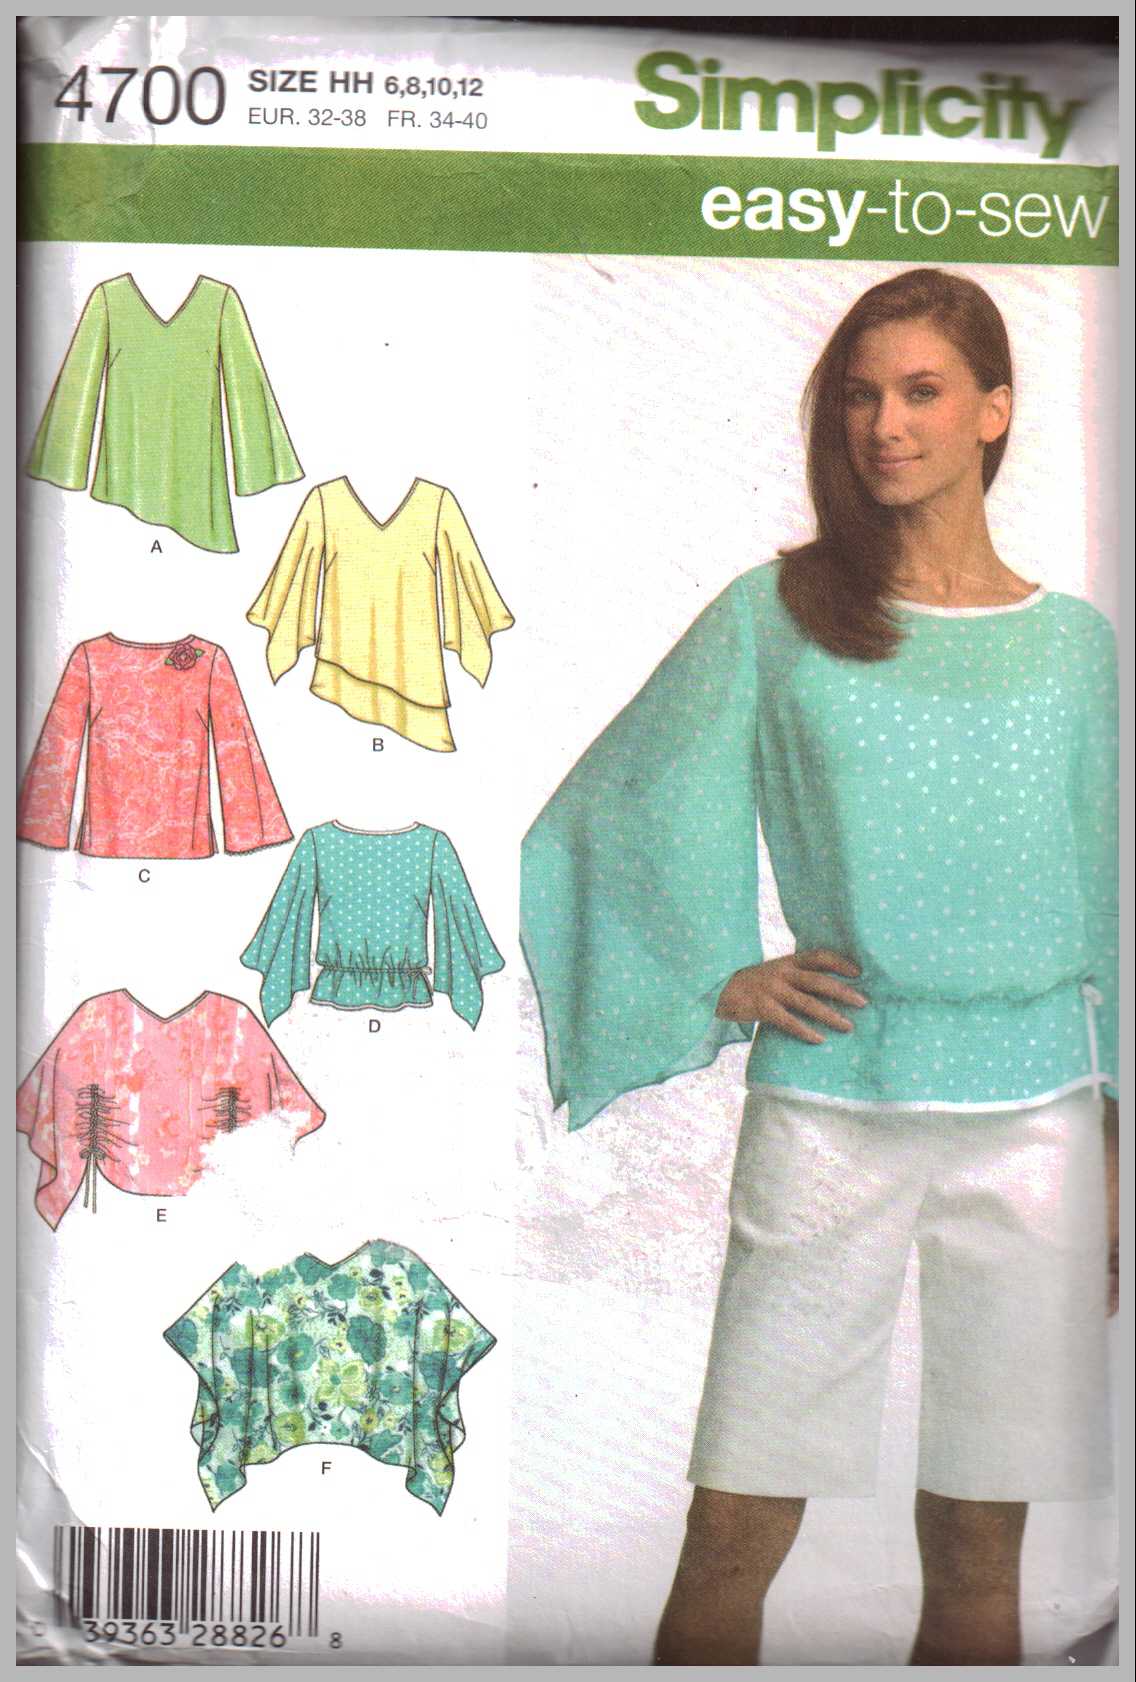 Simplicity 4700 Top, Poncho Size: HH 6-8-10-12 Uncut Sewing Pattern